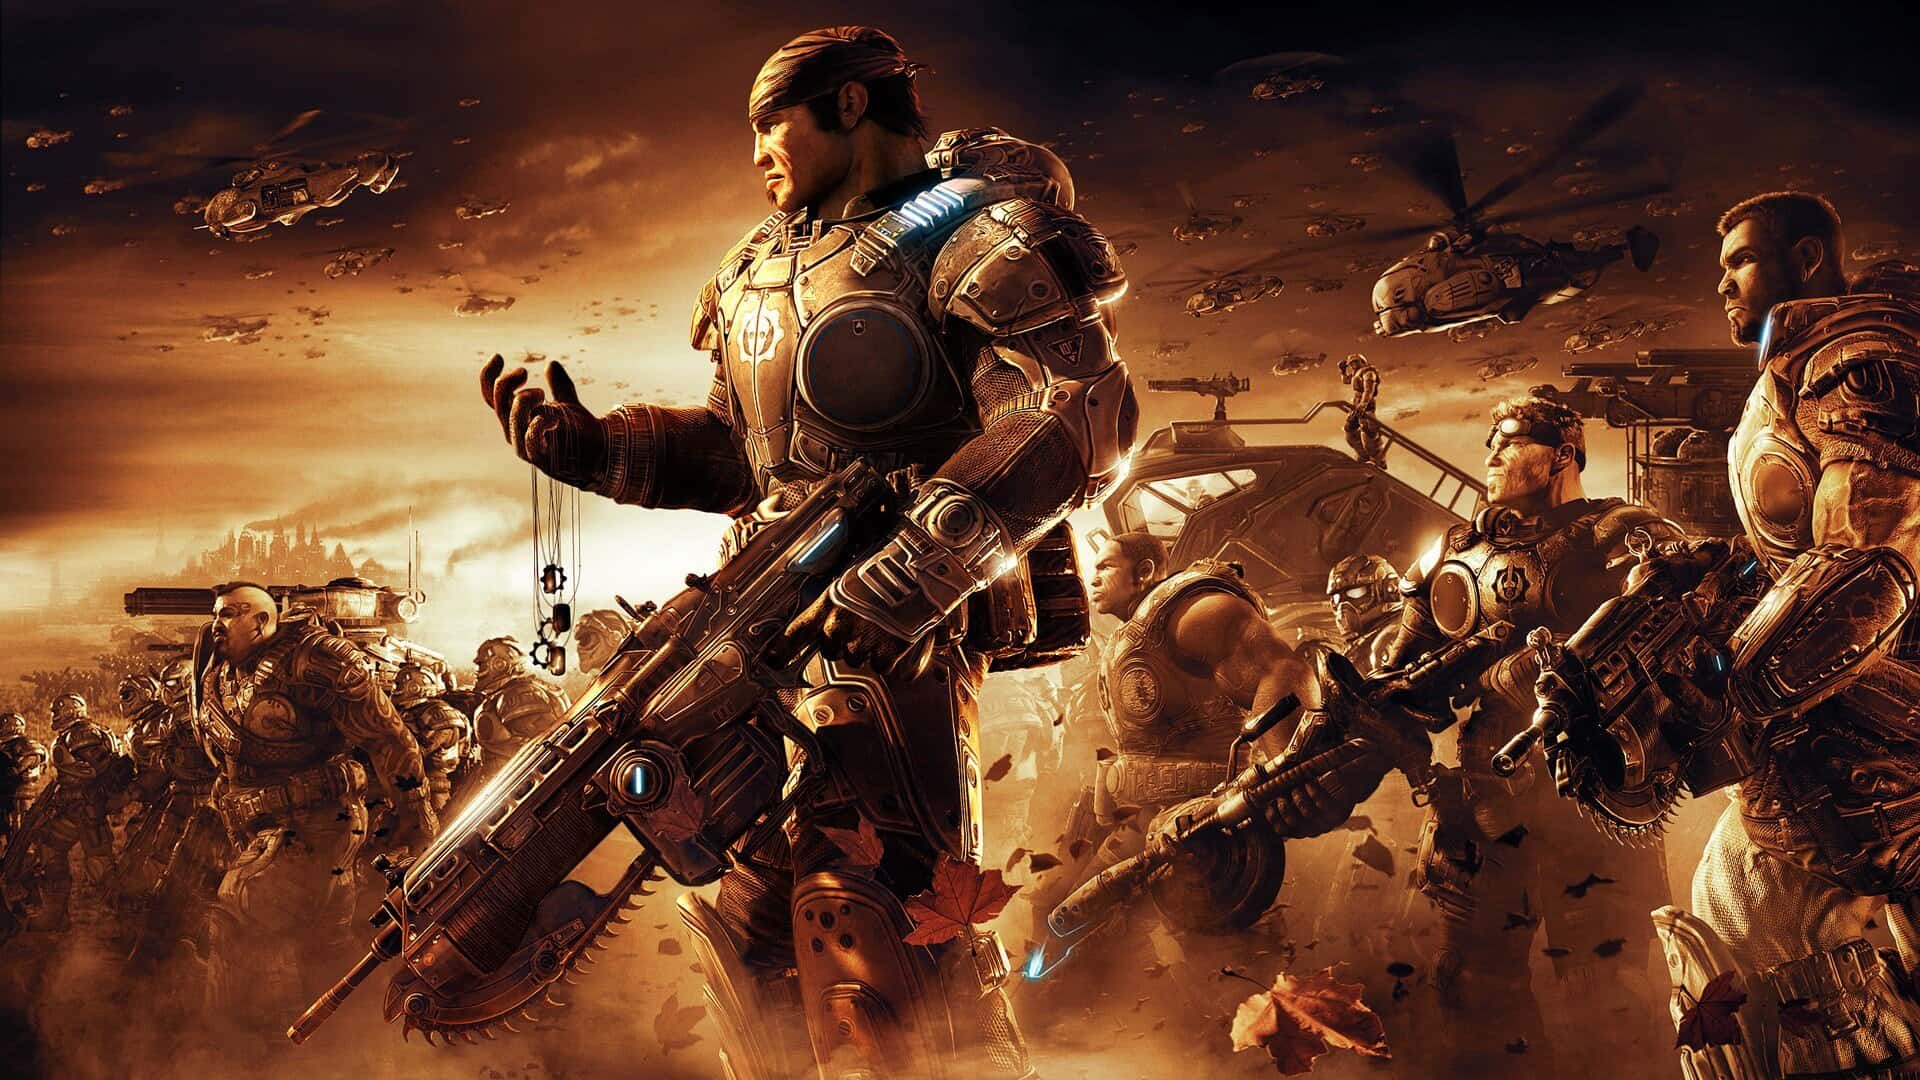 Gears of War 3  Video Game Reviews and Previews PC, PS4, Xbox One and  mobile